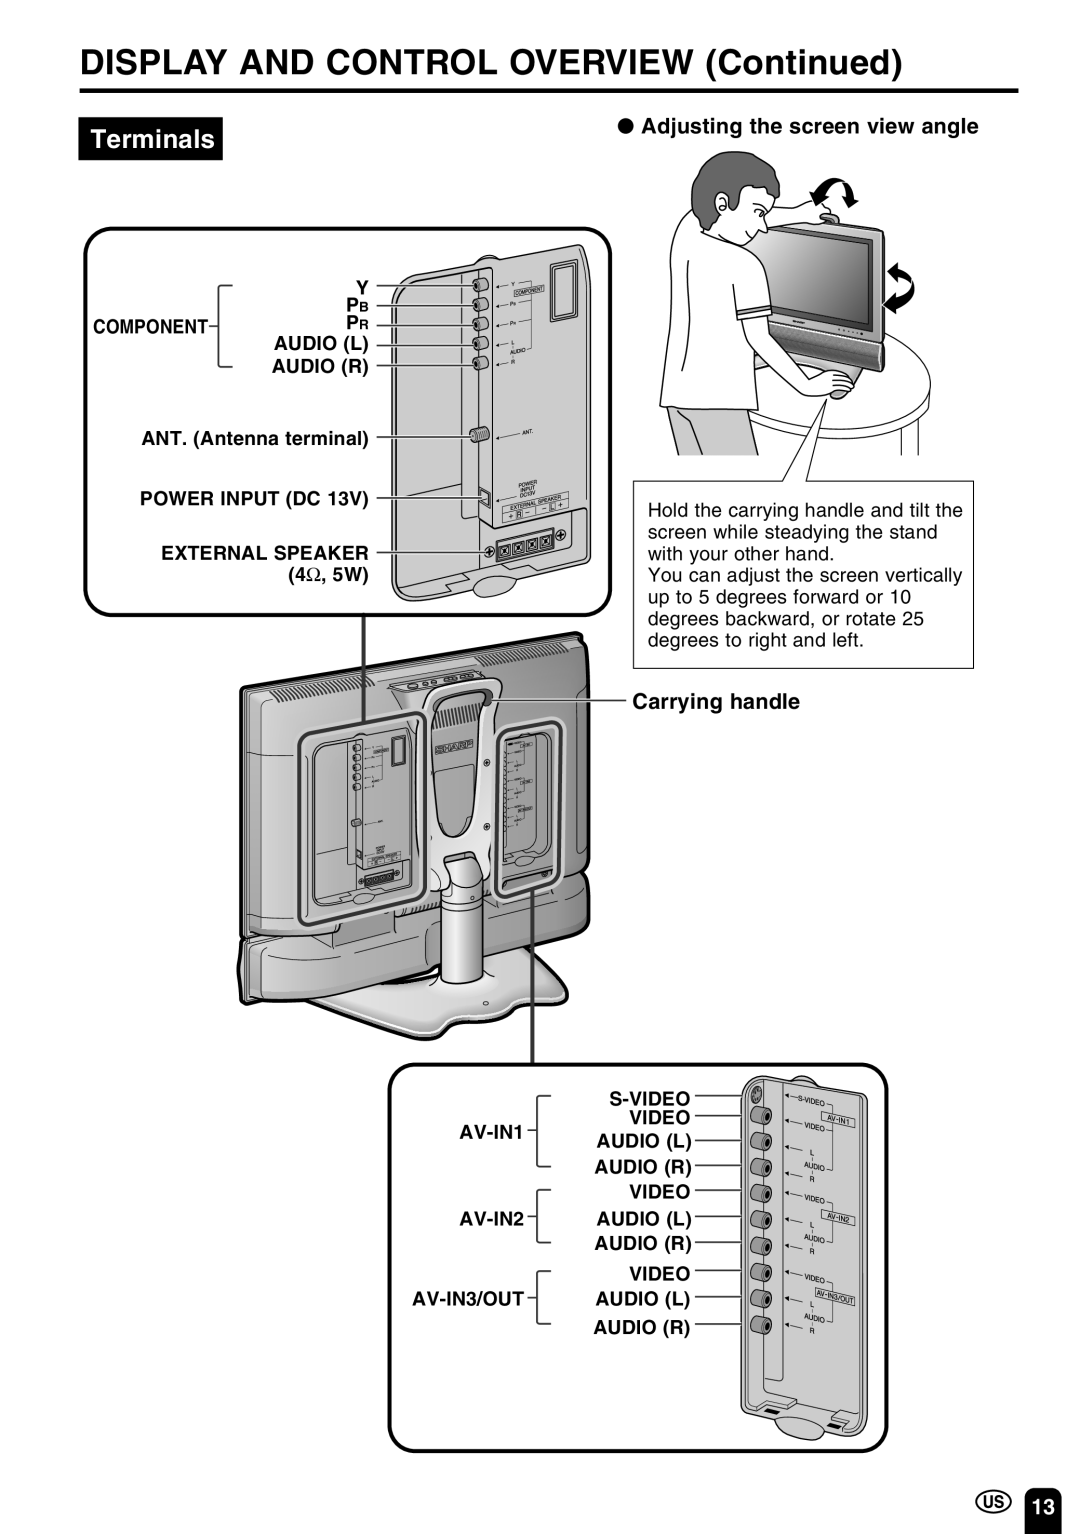 Sharp LC-22SV6U DISPLAY AND CONTROL OVERVIEW Continued, Terminals, Adjusting the screen view angle, Carrying handle 